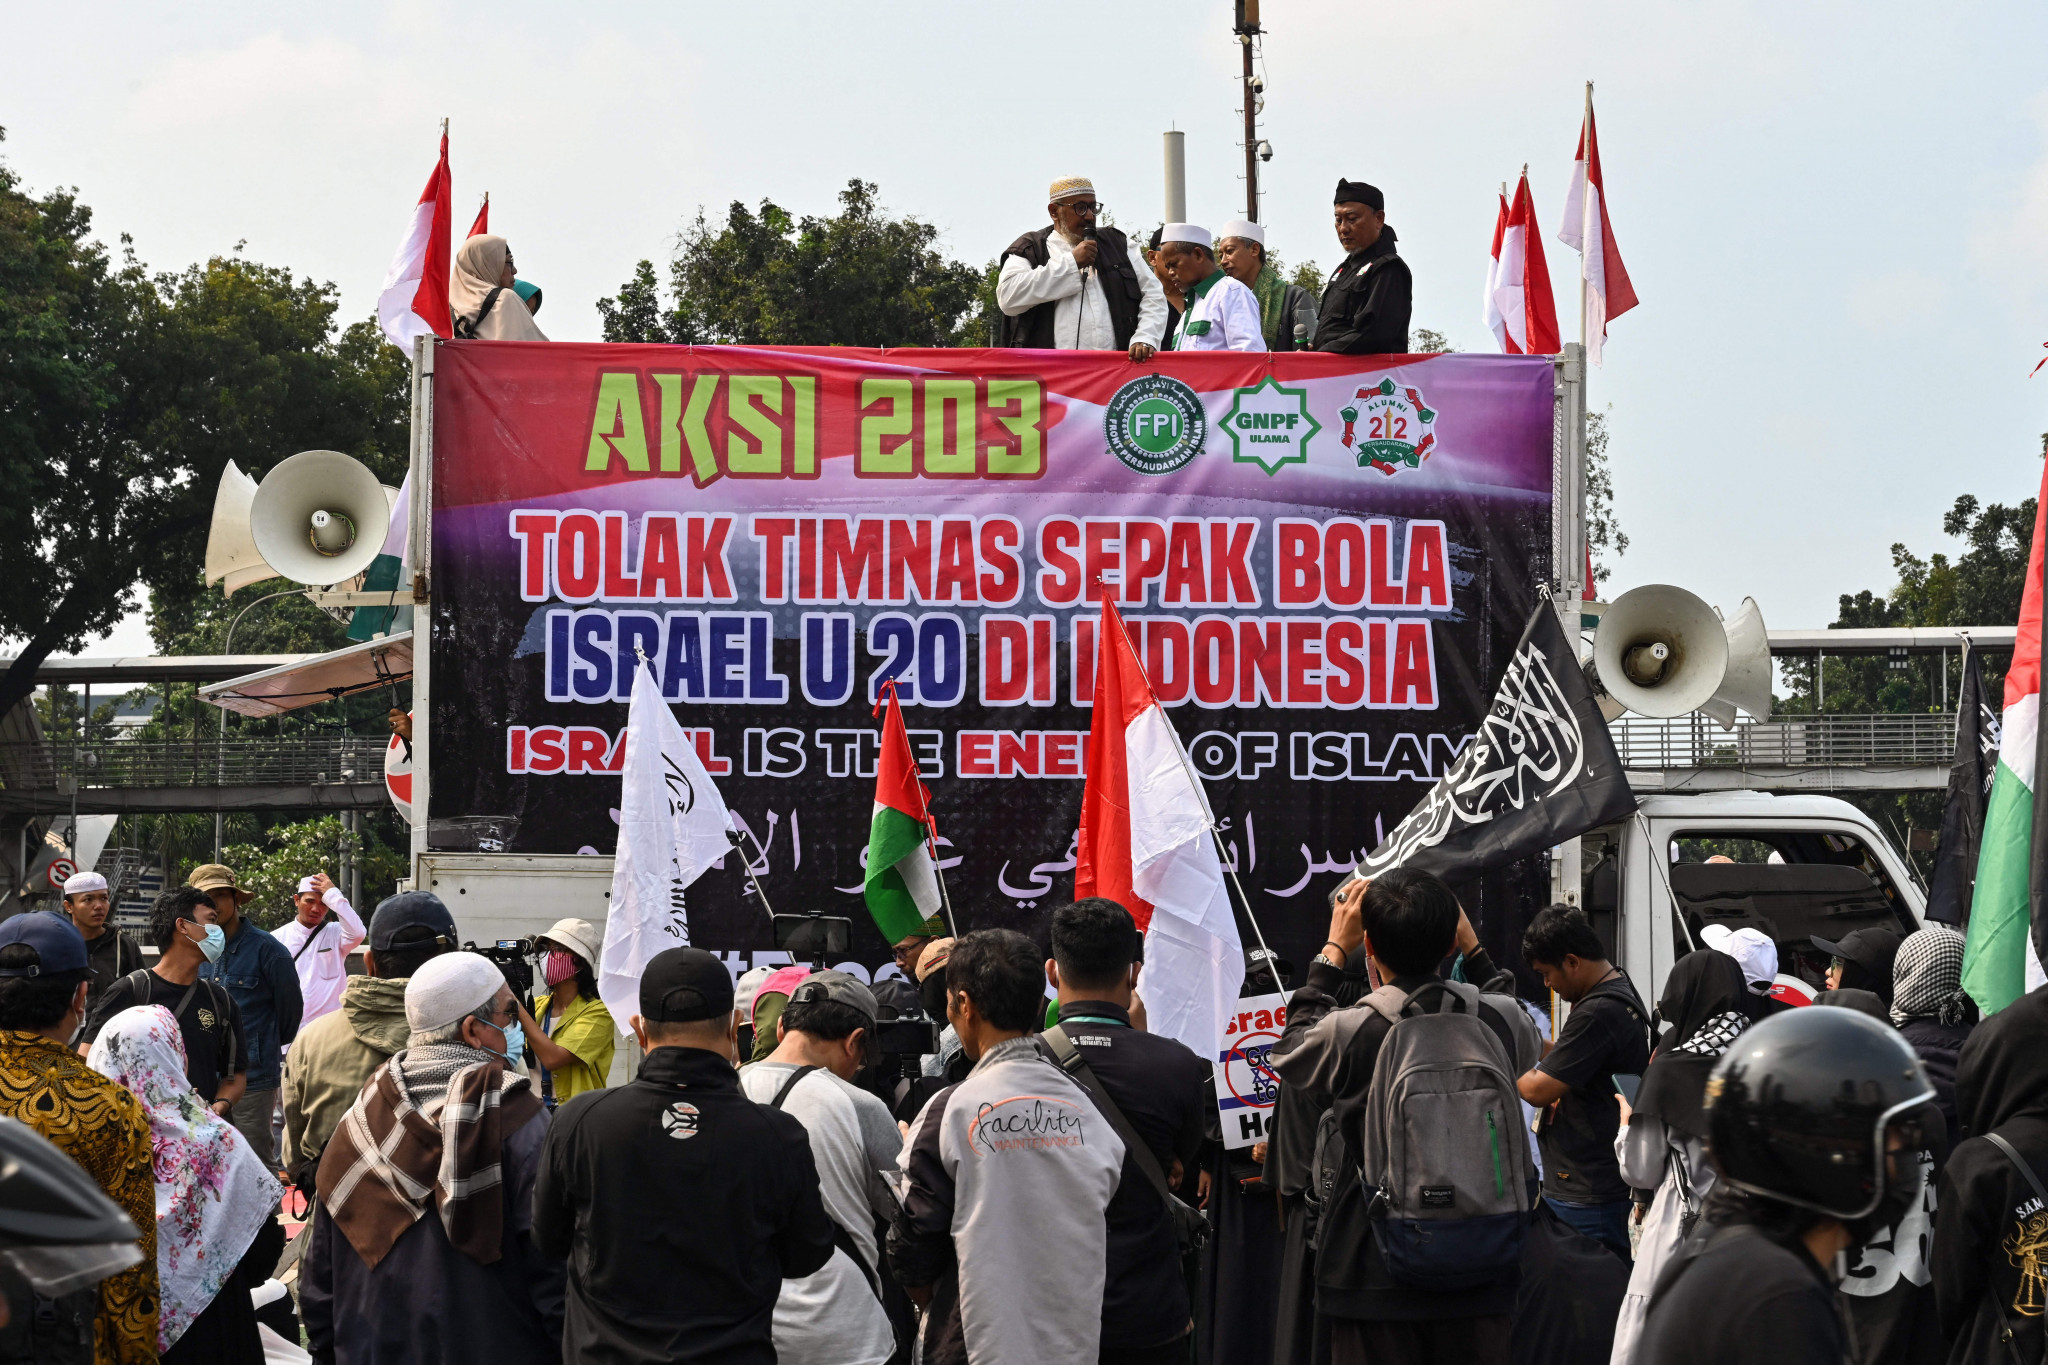 Protests took place in Jakarta against Israel's participation at the Under-20 World Cup, which Indonesia has now been removed as host of ©Getty Images